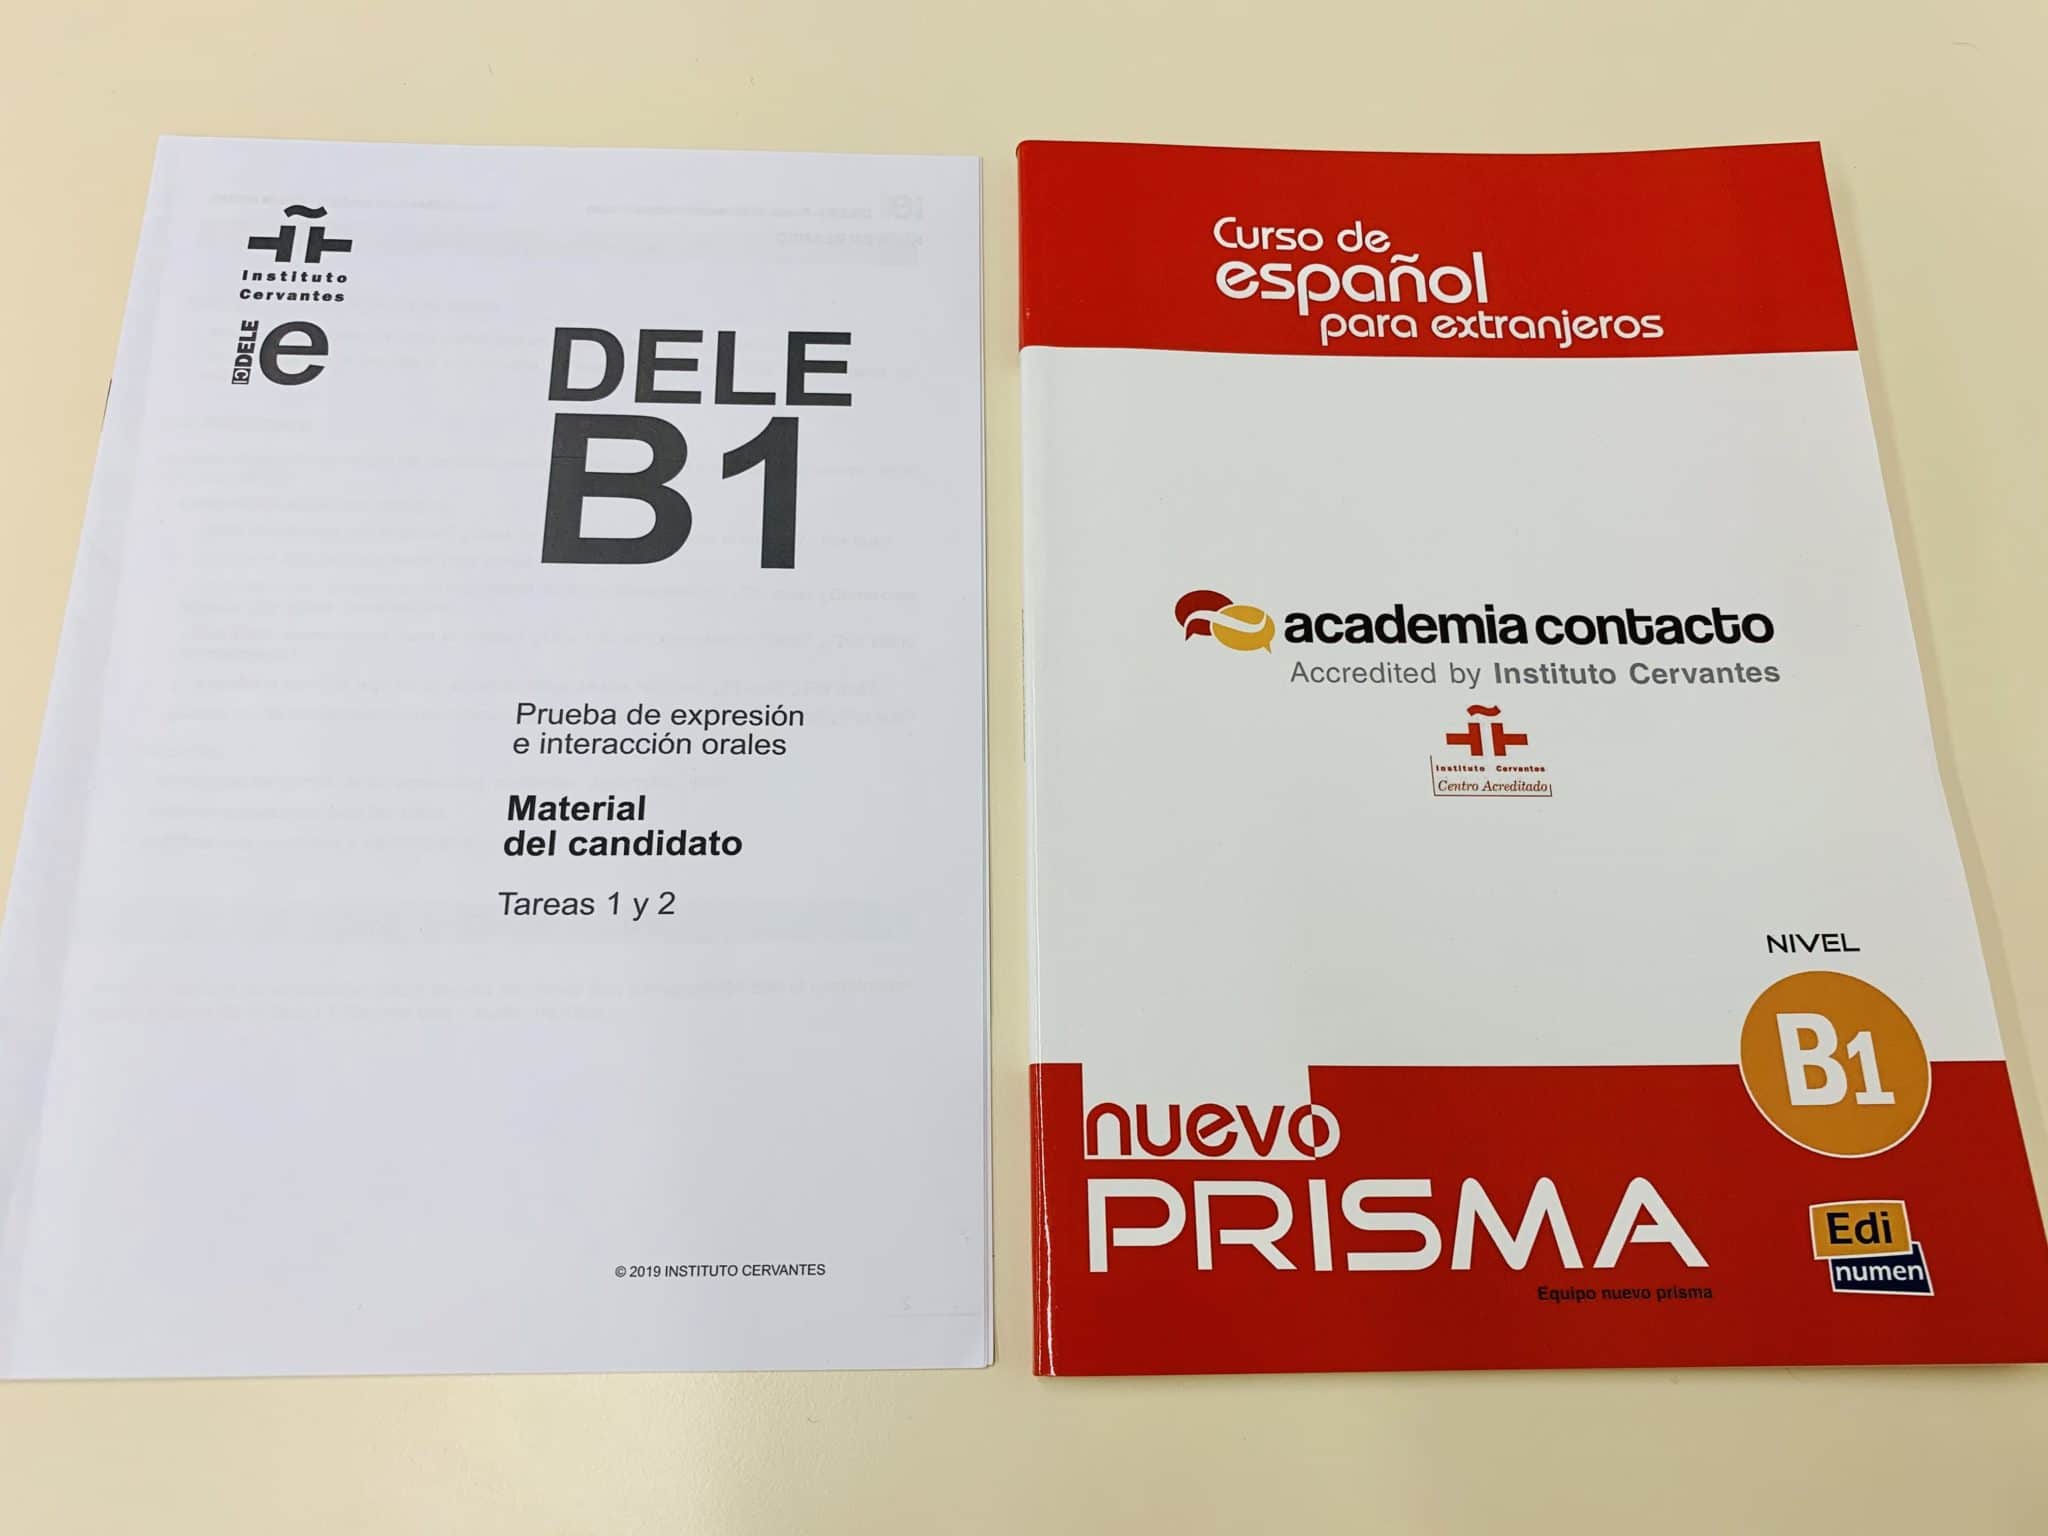 How to prepare for the B1 DELE exam in our Spanish school